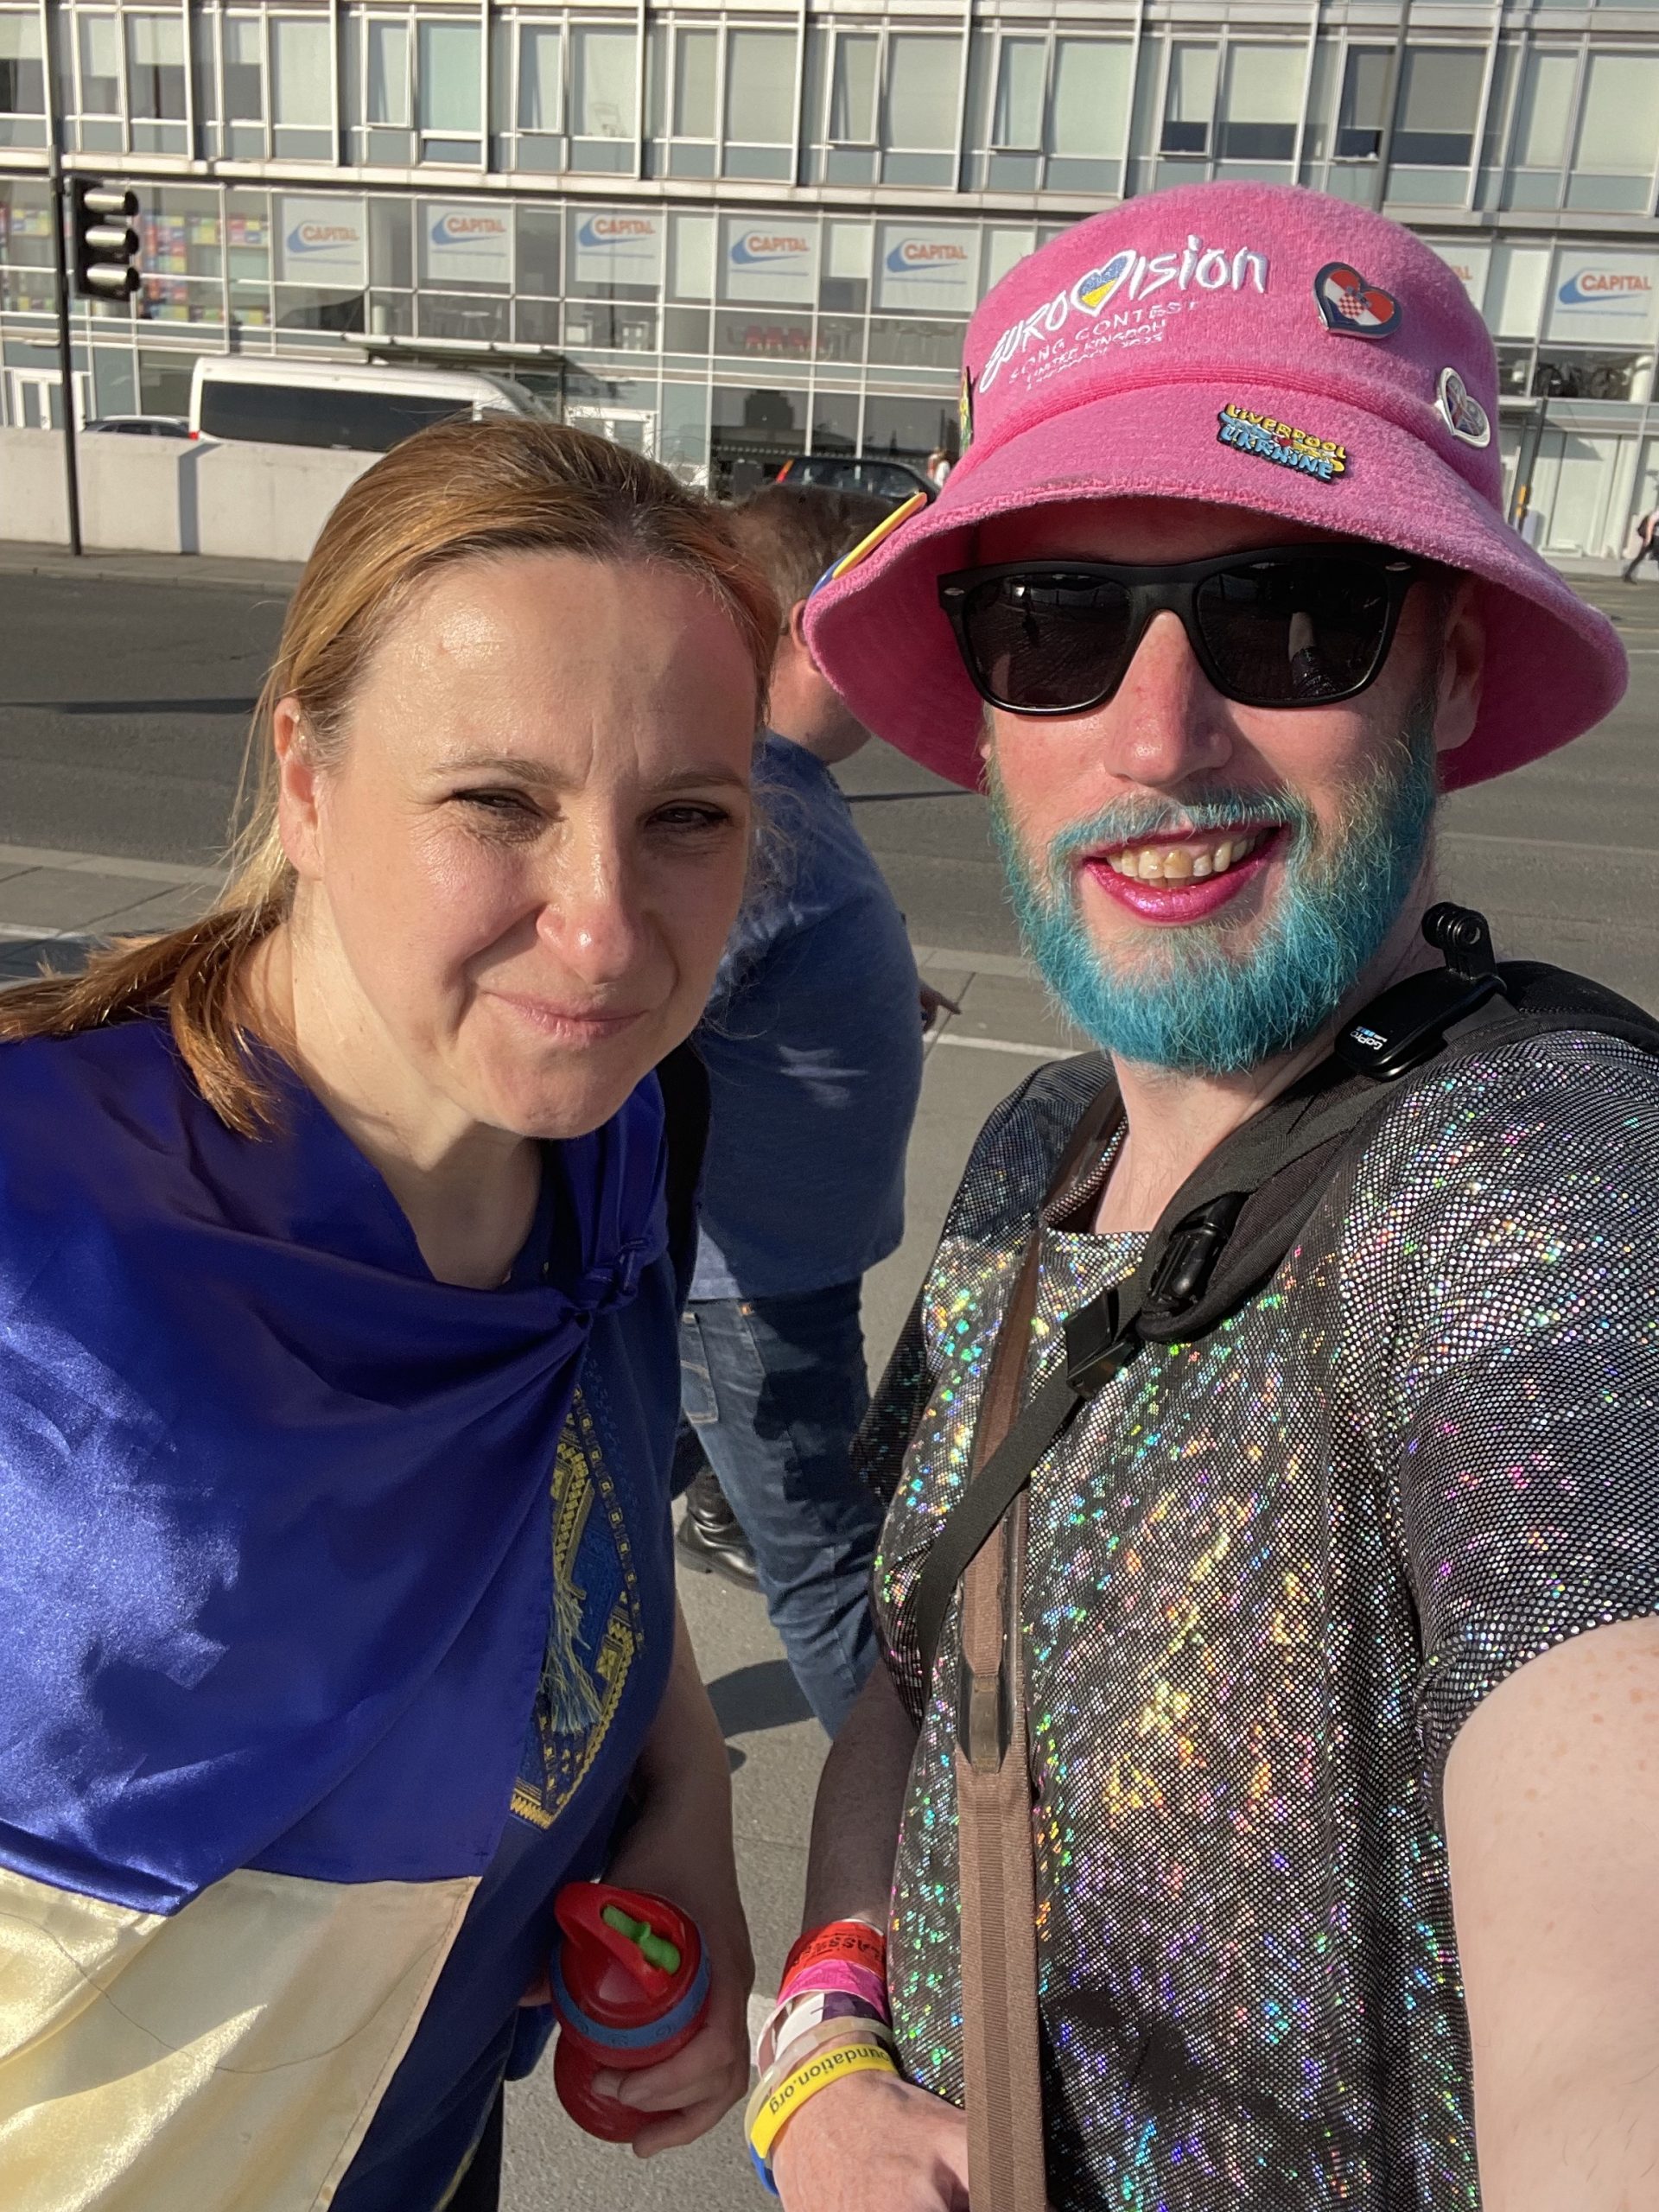 Non-binary person on the right in a sparkly dress, with blue beard and pink hat. Ukrainian woman on the left. Both smiling to camera.